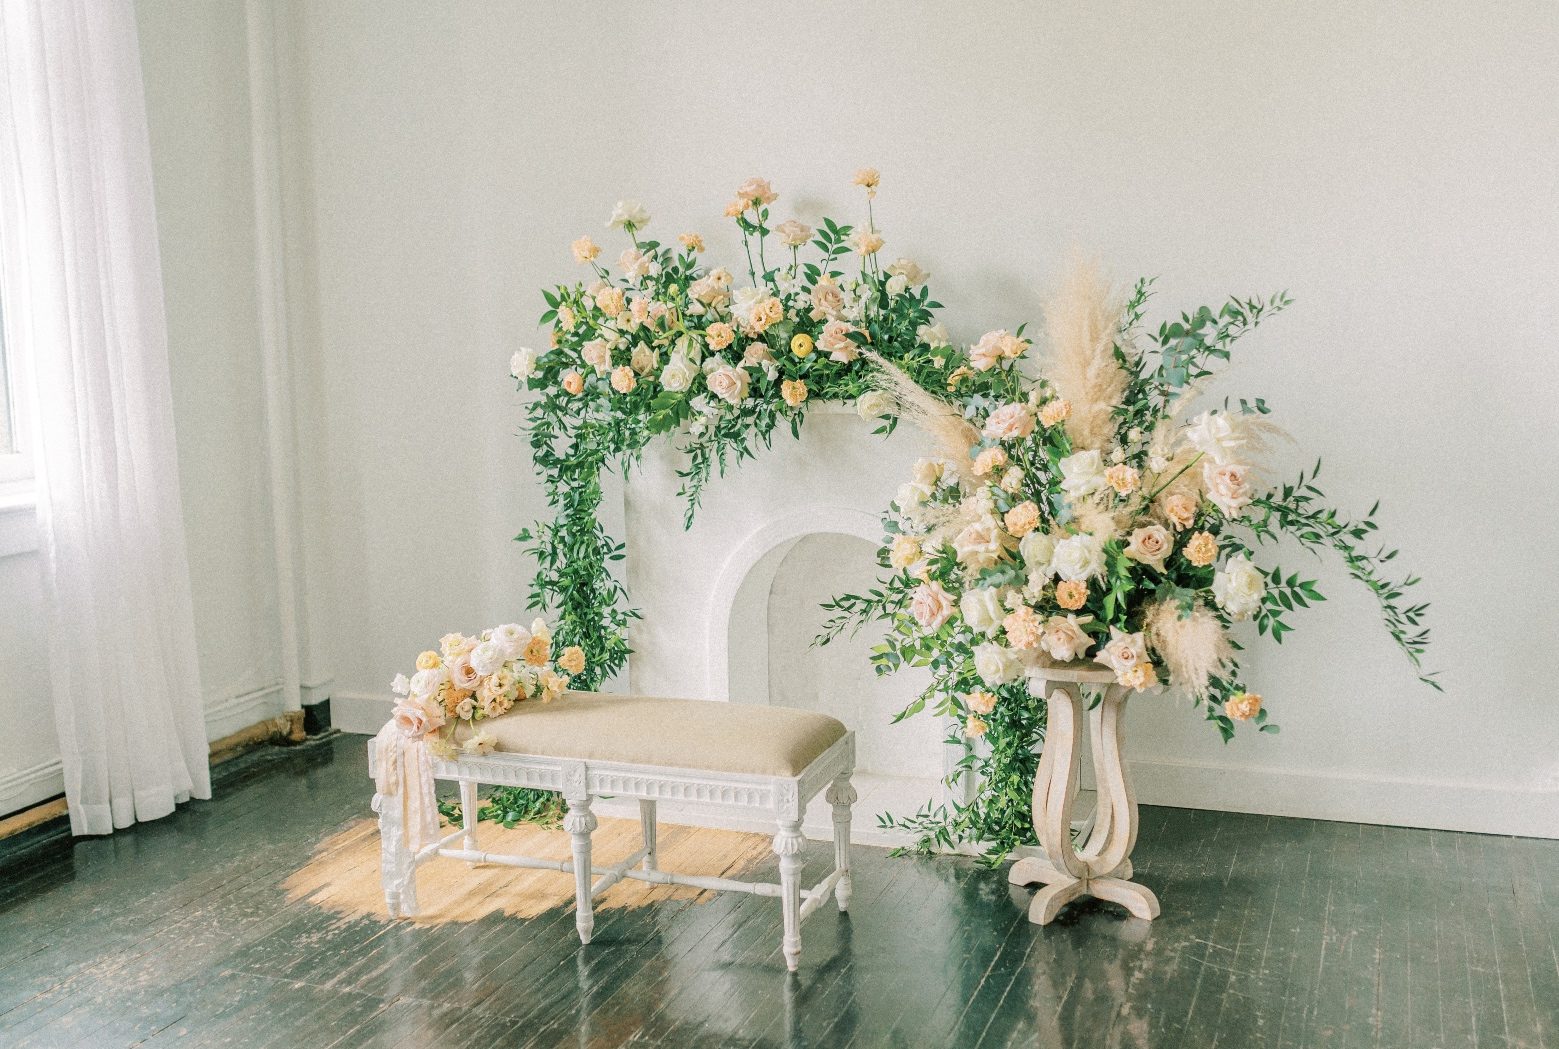 A shot capturing all of the Calyx Floral Design flowers for the photo shoot, including a large arrangement over the mantel of the faux fireplace, a large arrangement on top of a stand and a bench with the bridal bouquet set on it's side.